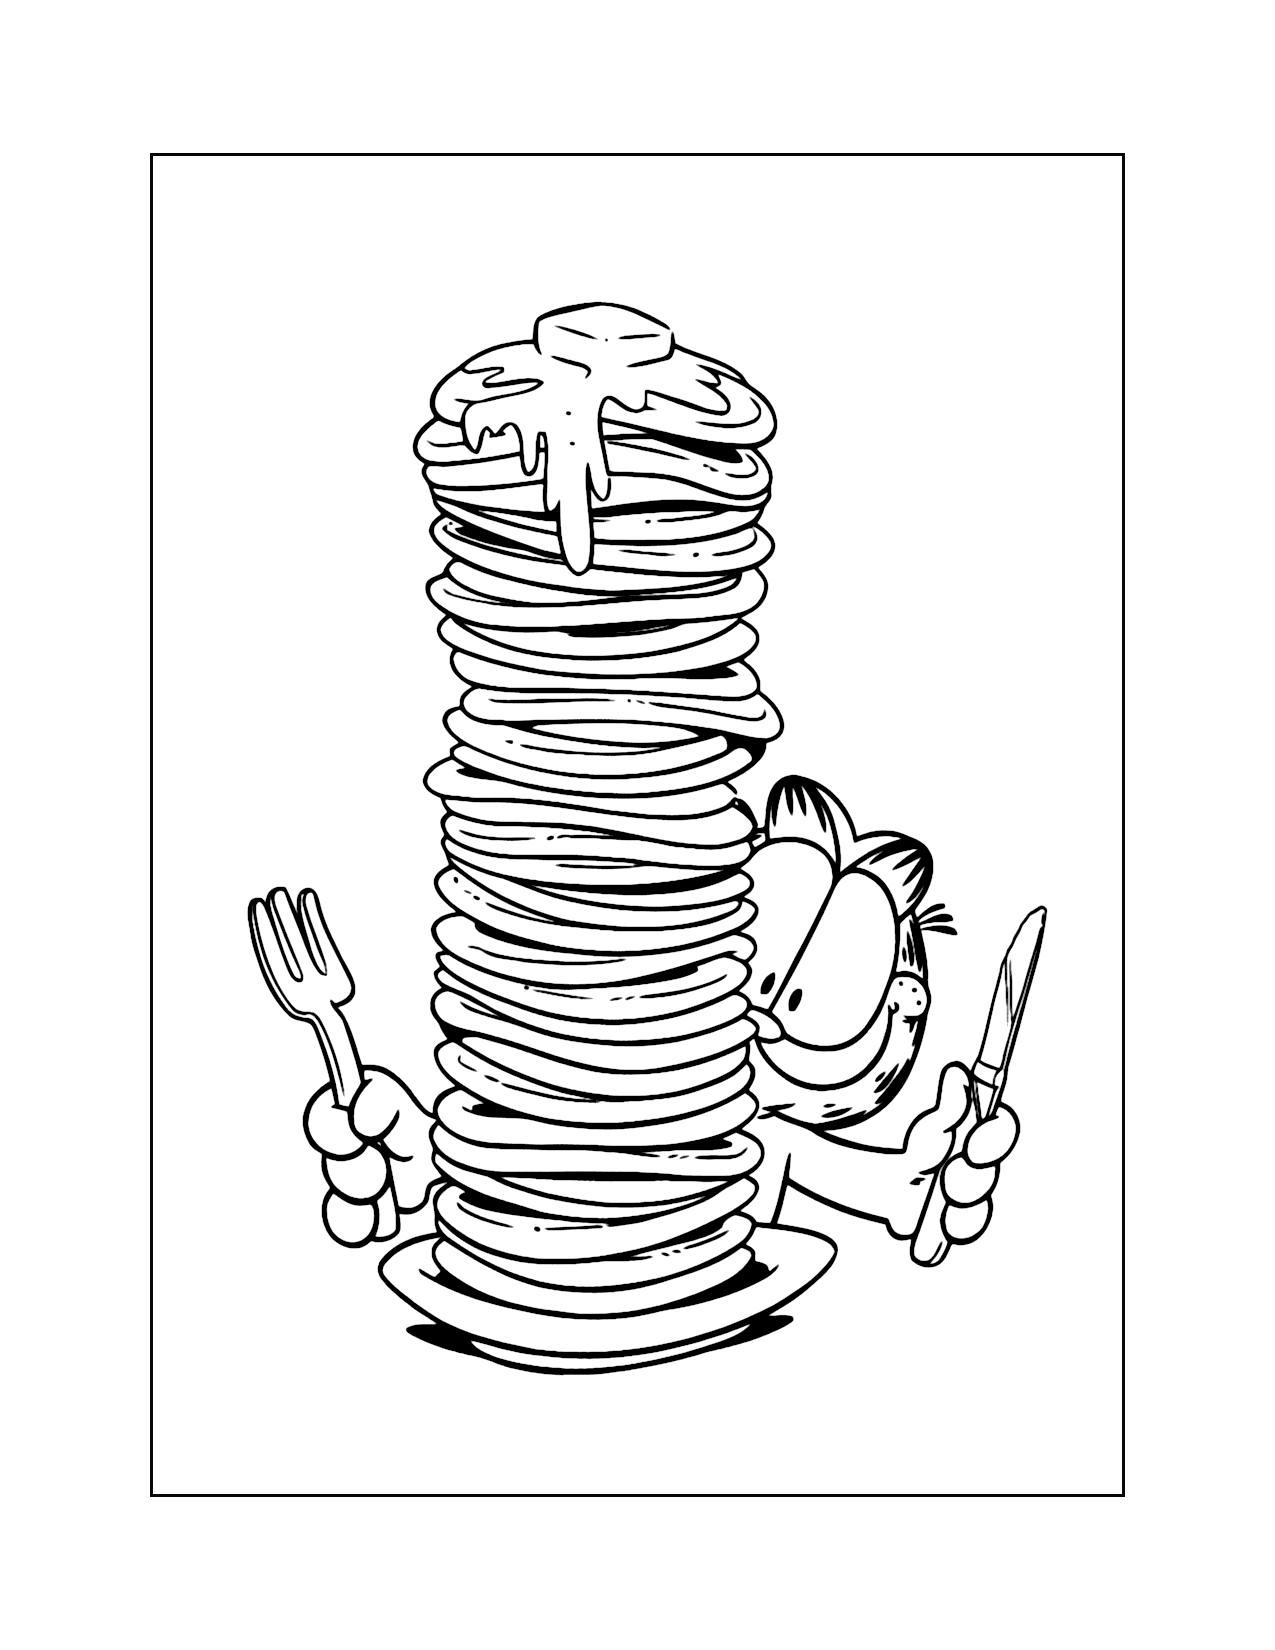 Garfield With A Huge Stack Of Pancakes Coloring Page